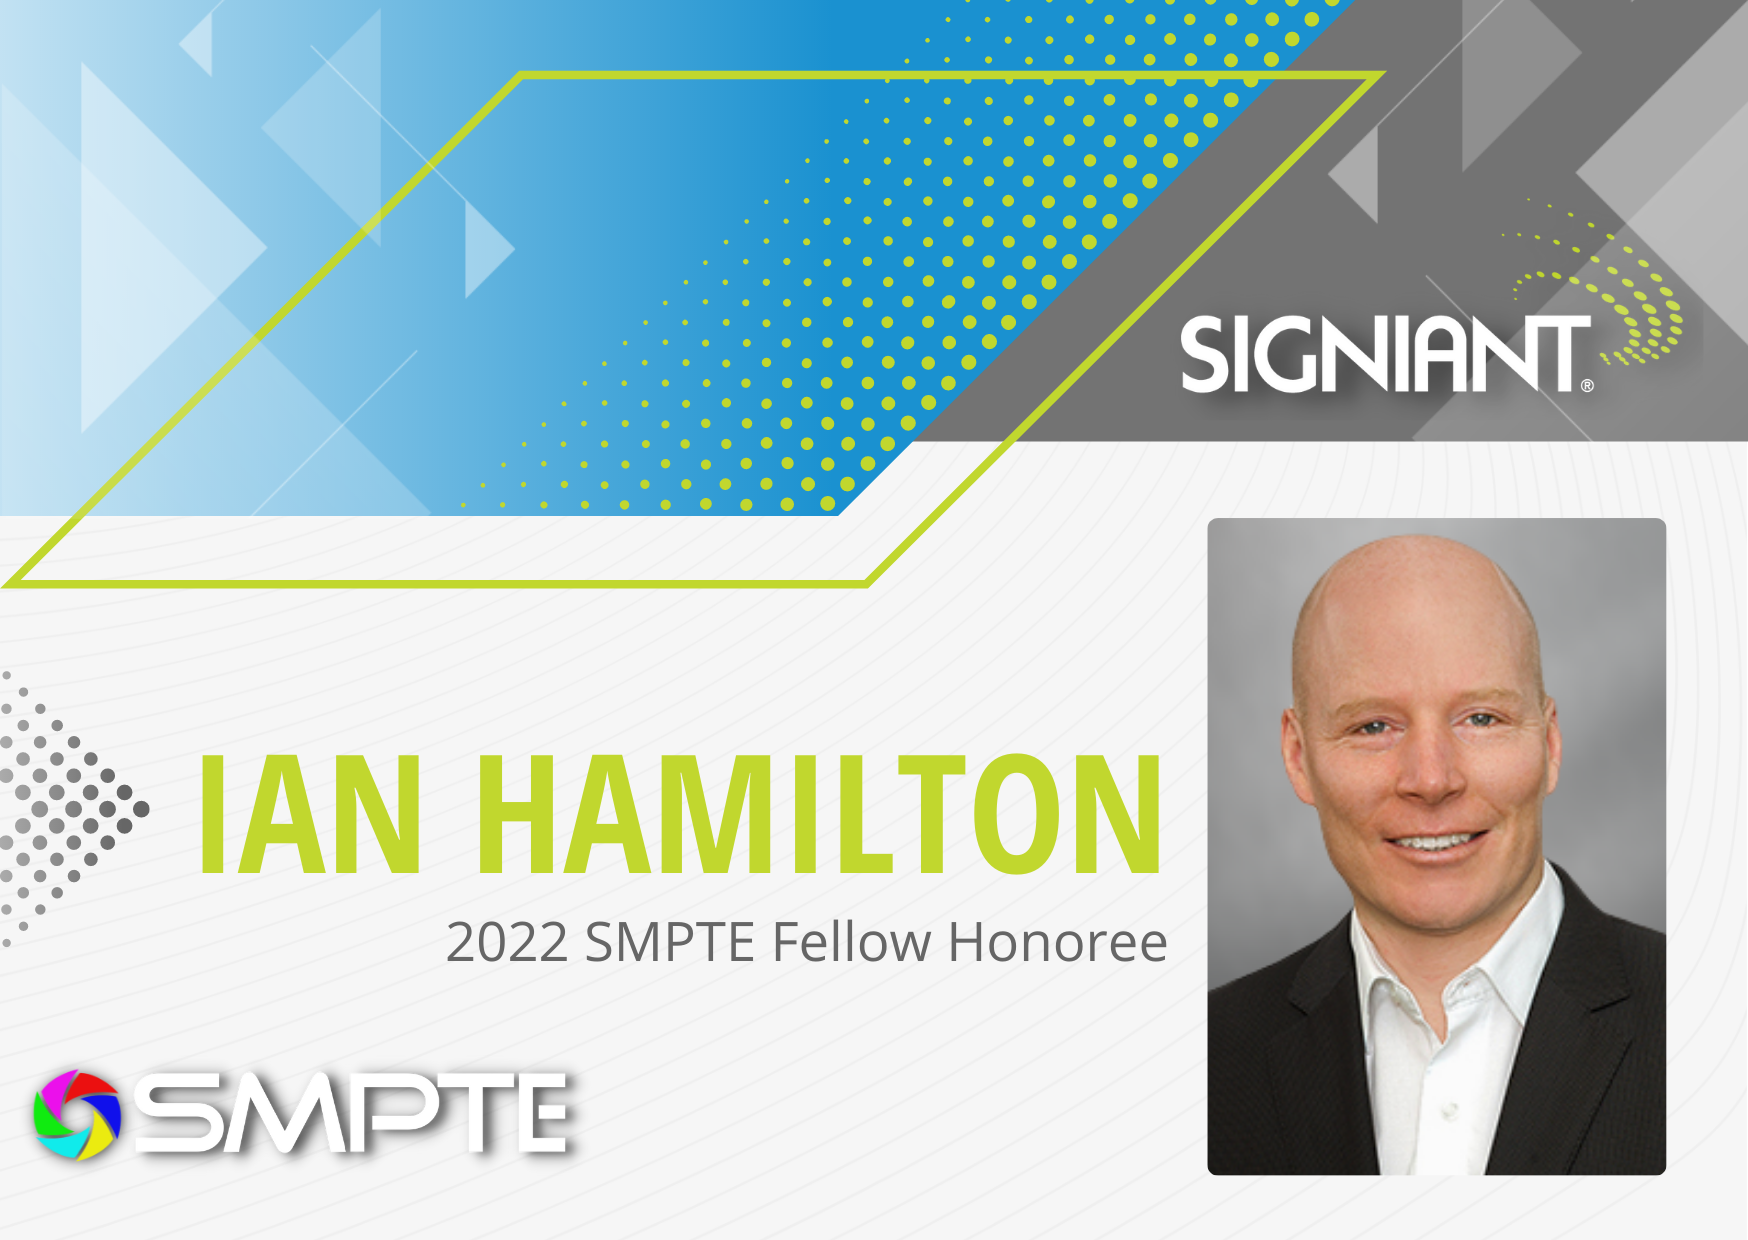 Ian Hamilton picture with "2022 SMPTE Fellow Honoree" text